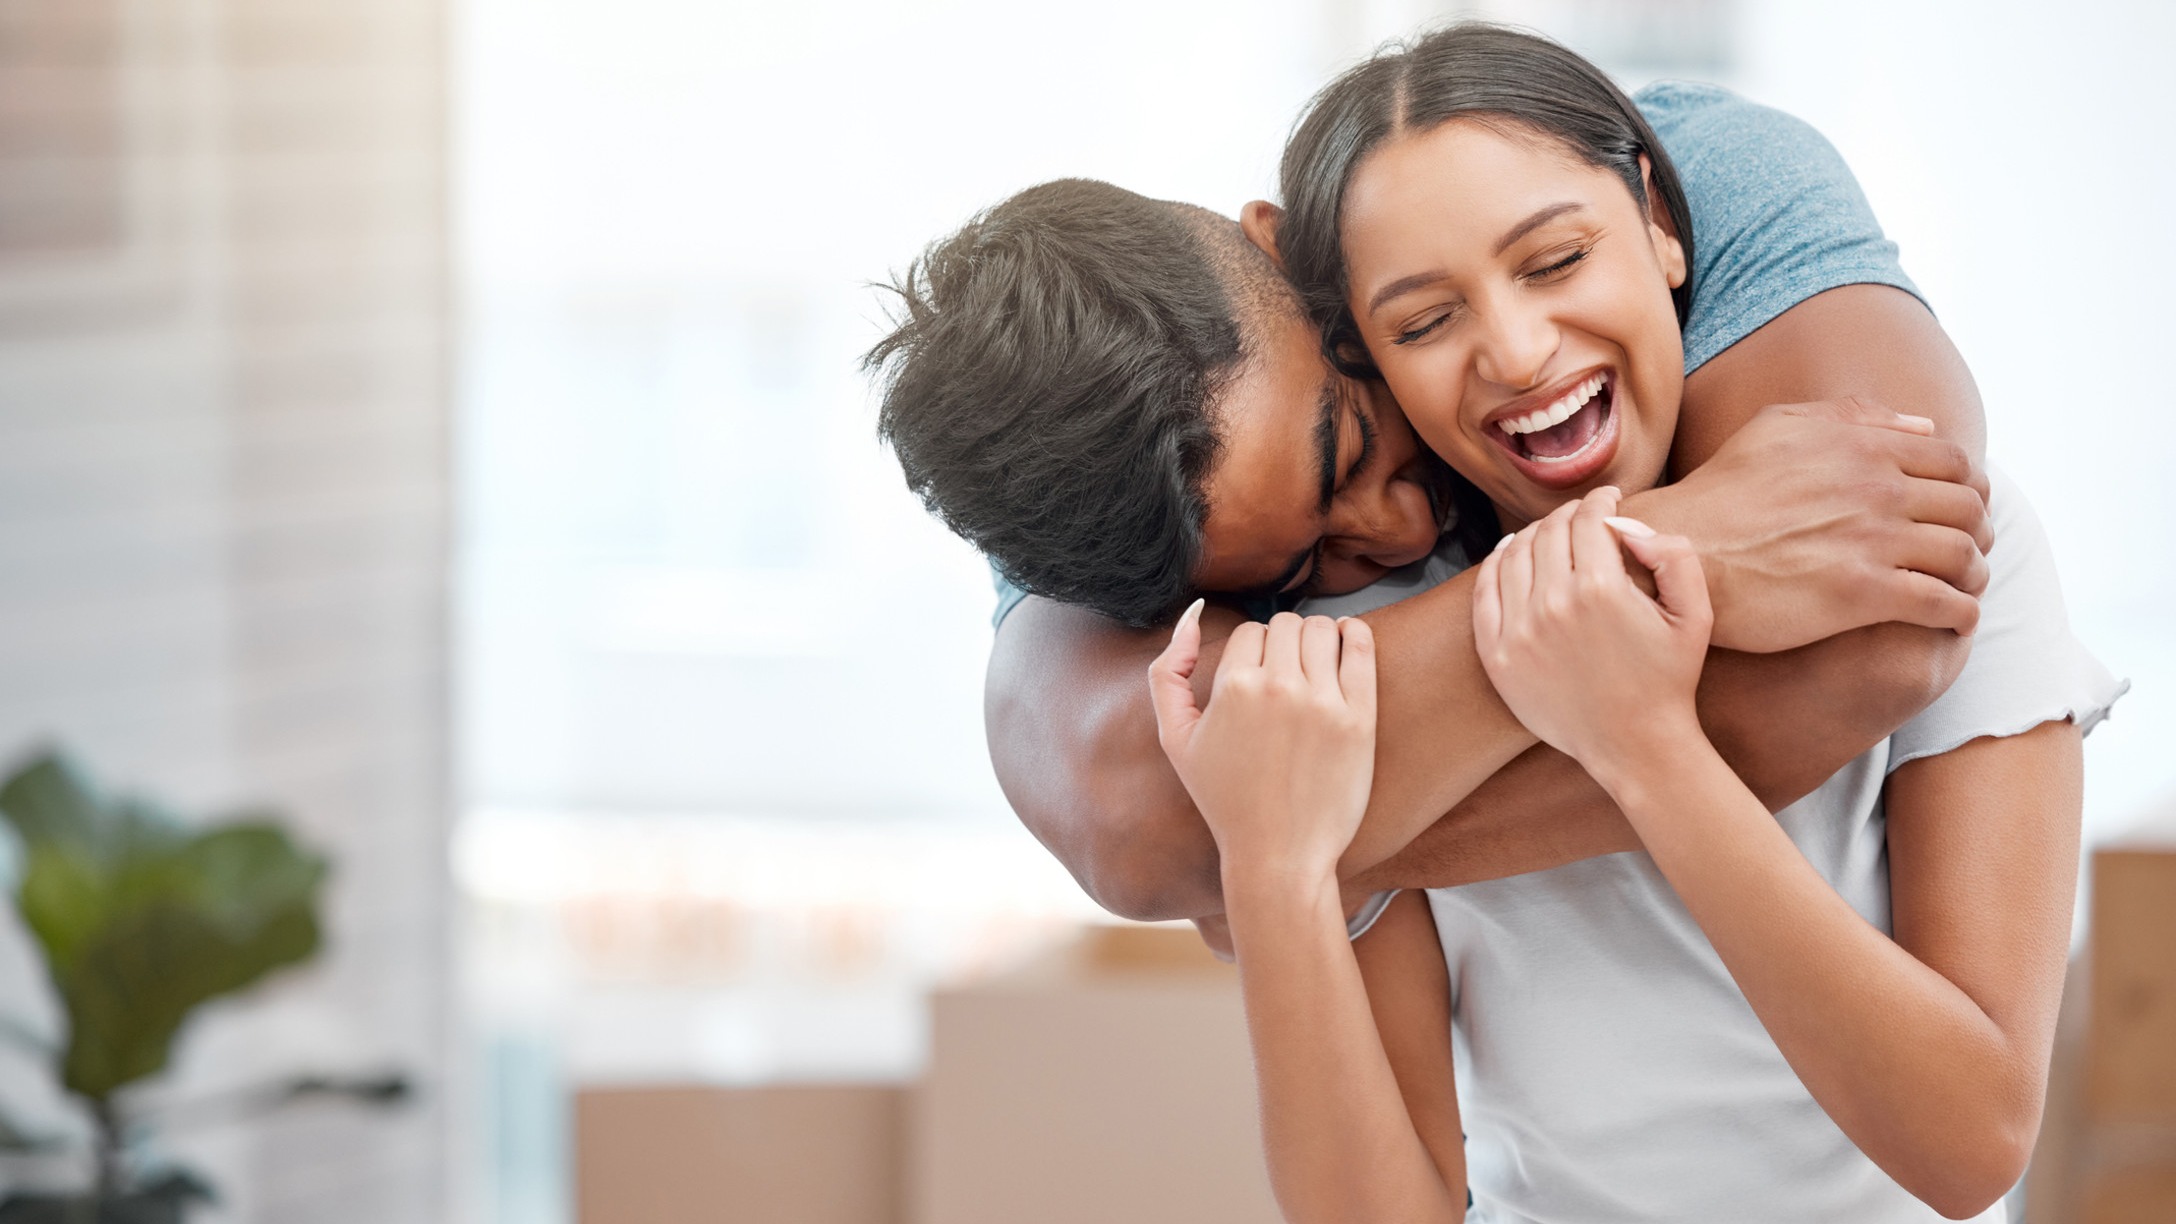 5 Signs You Are in a Healthy and Loving Relationship, According to a Sex Therapist